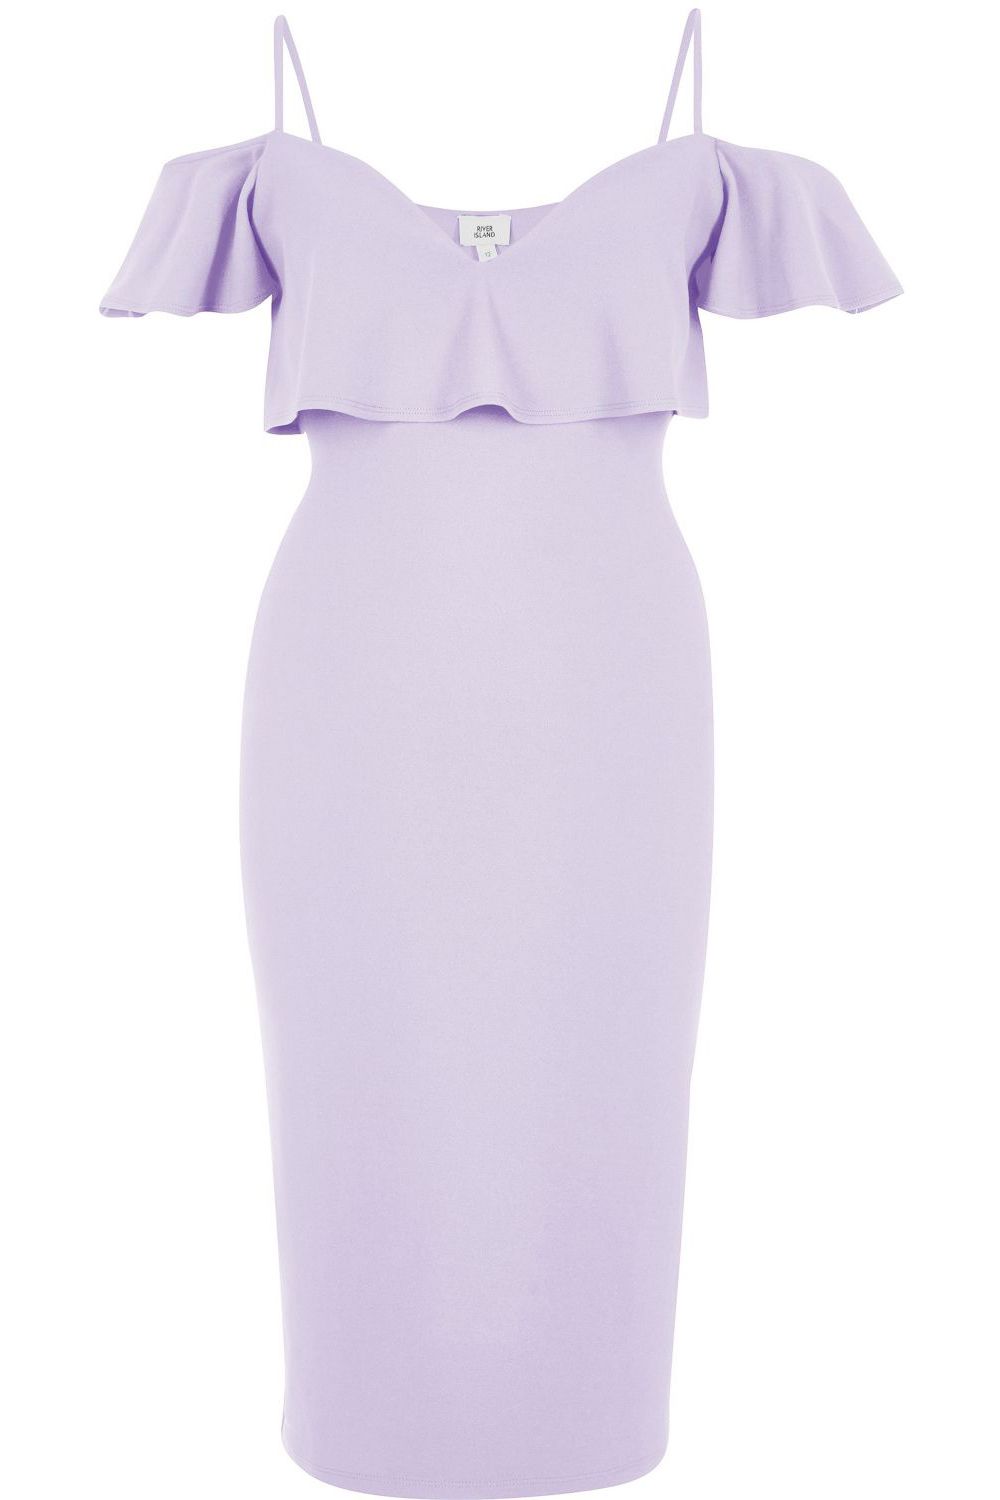 river island dresses for wedding guests